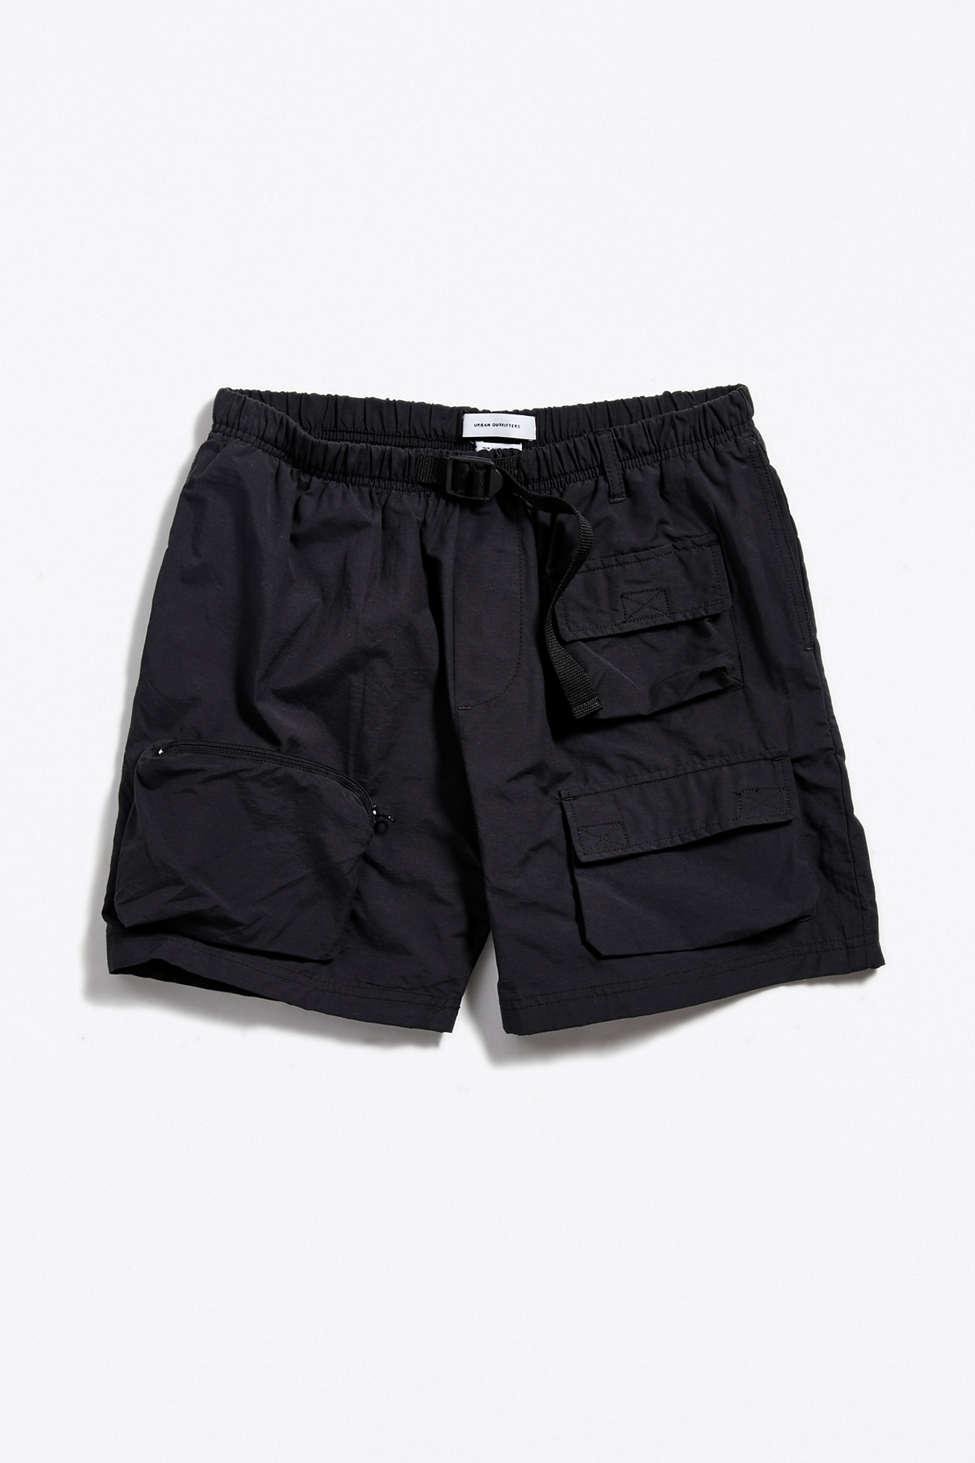 Urban Outfitters Cotton Uo Utility Cargo Short in Black for Men - Lyst